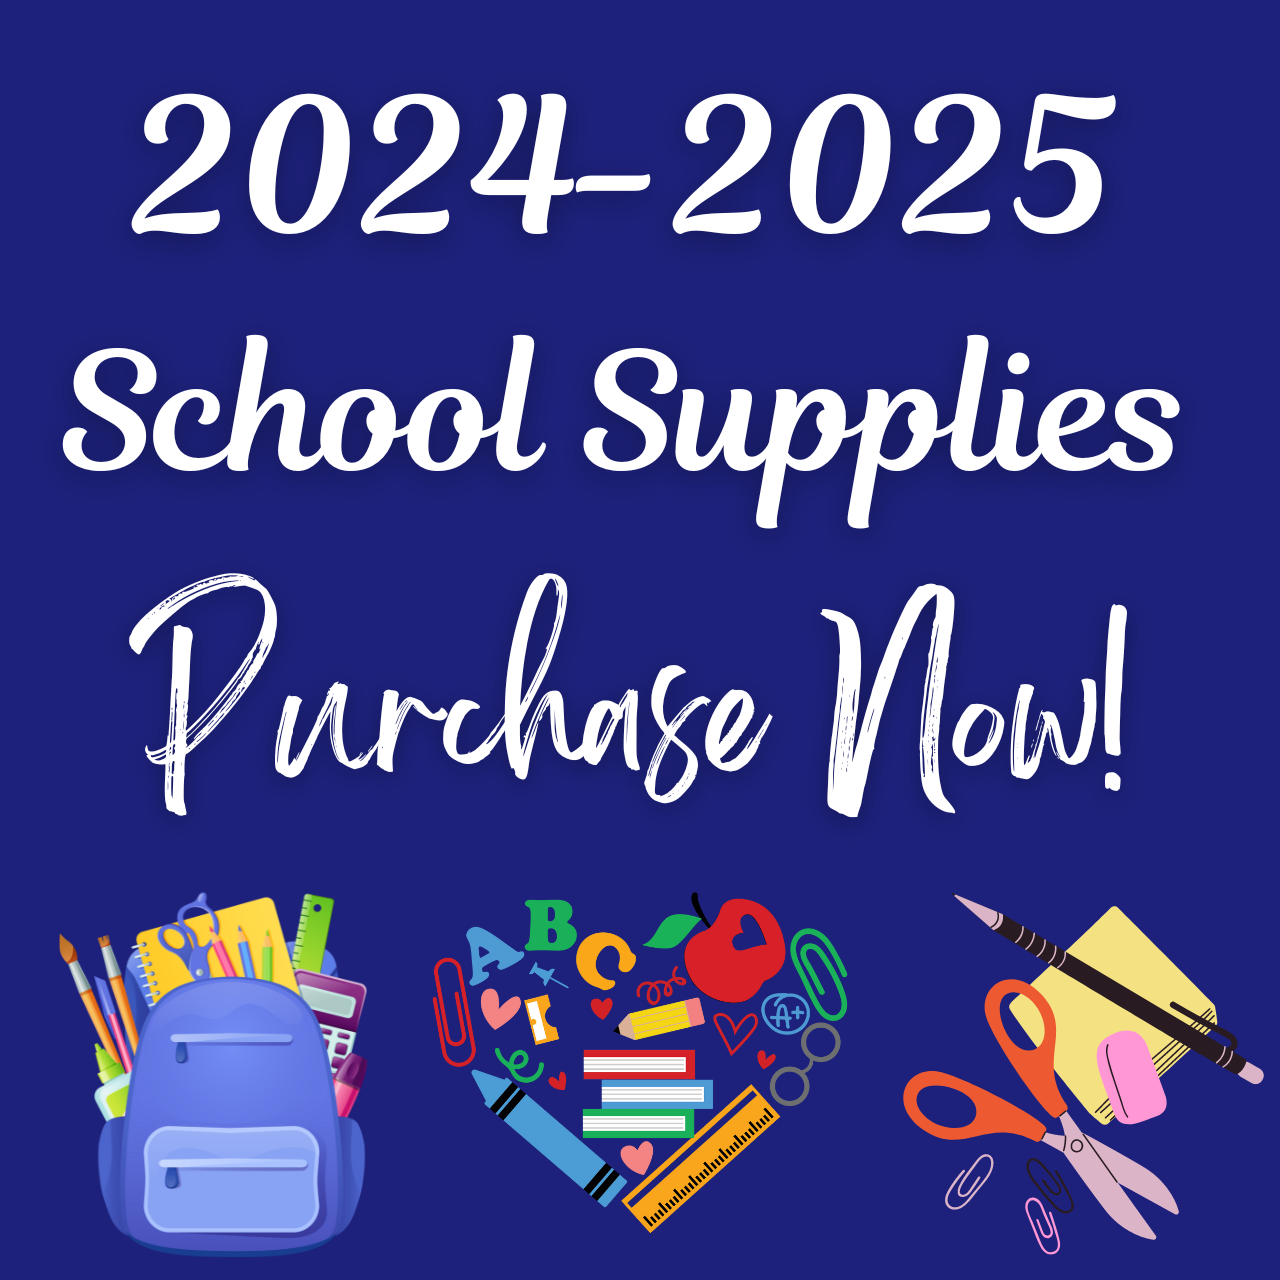 School Supplies - Purchase now!